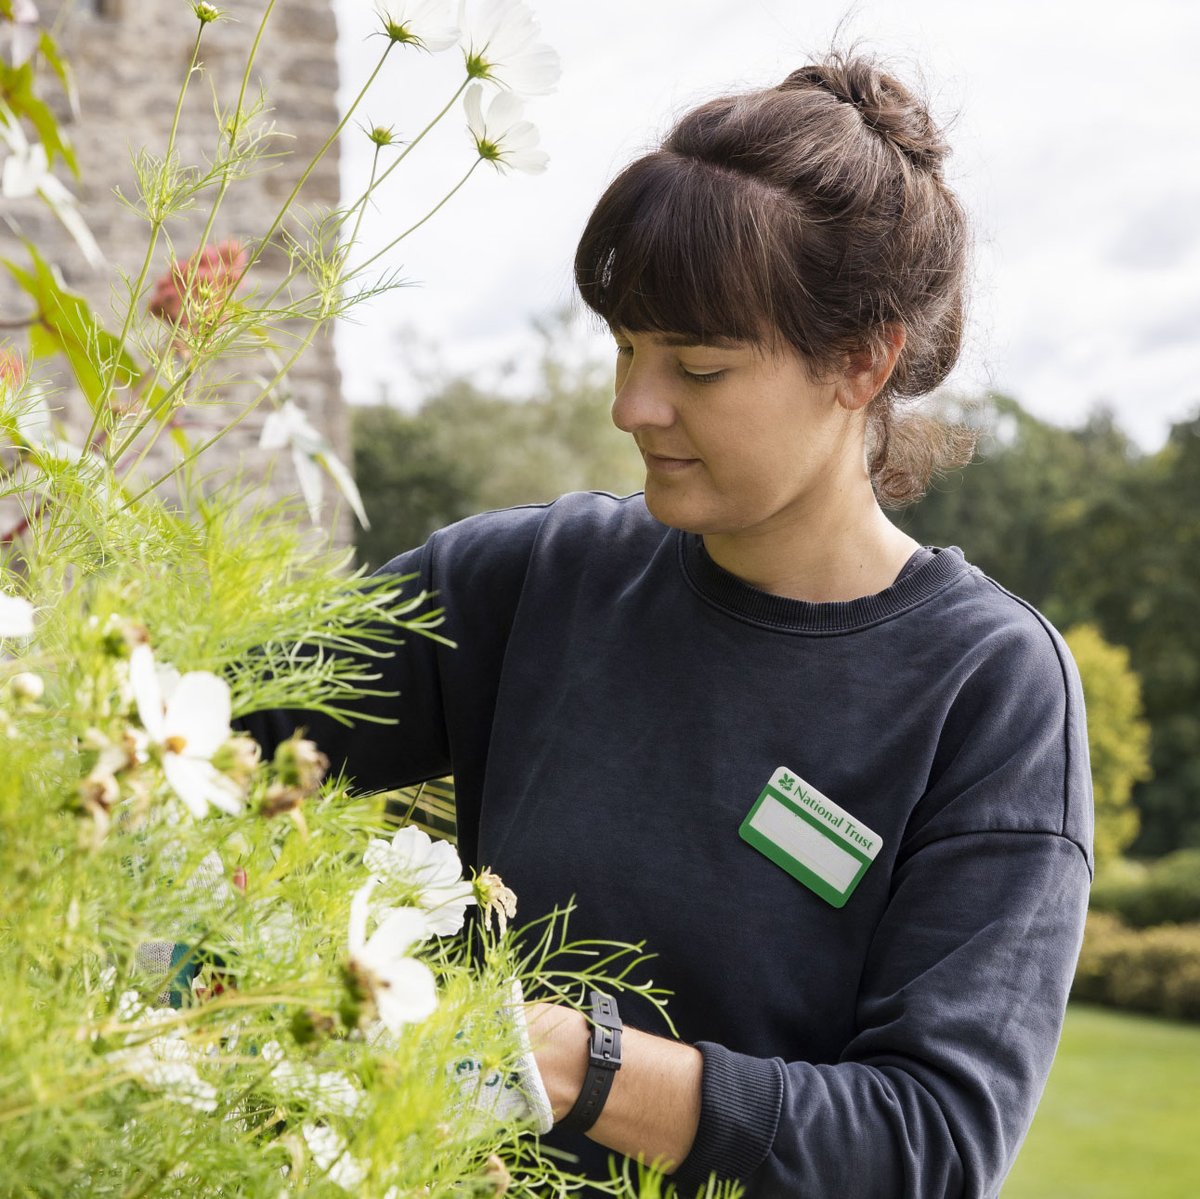 At Bodiam Castle, we always welcome new volunteers, whether you want a regular commitment or to just pop in for a specific role. We believe that life is one long adventure, and we'd love to be part of yours. Find out more: bit.ly/4aPvjWJ 📷 ©NTI/Annapurna Mellor